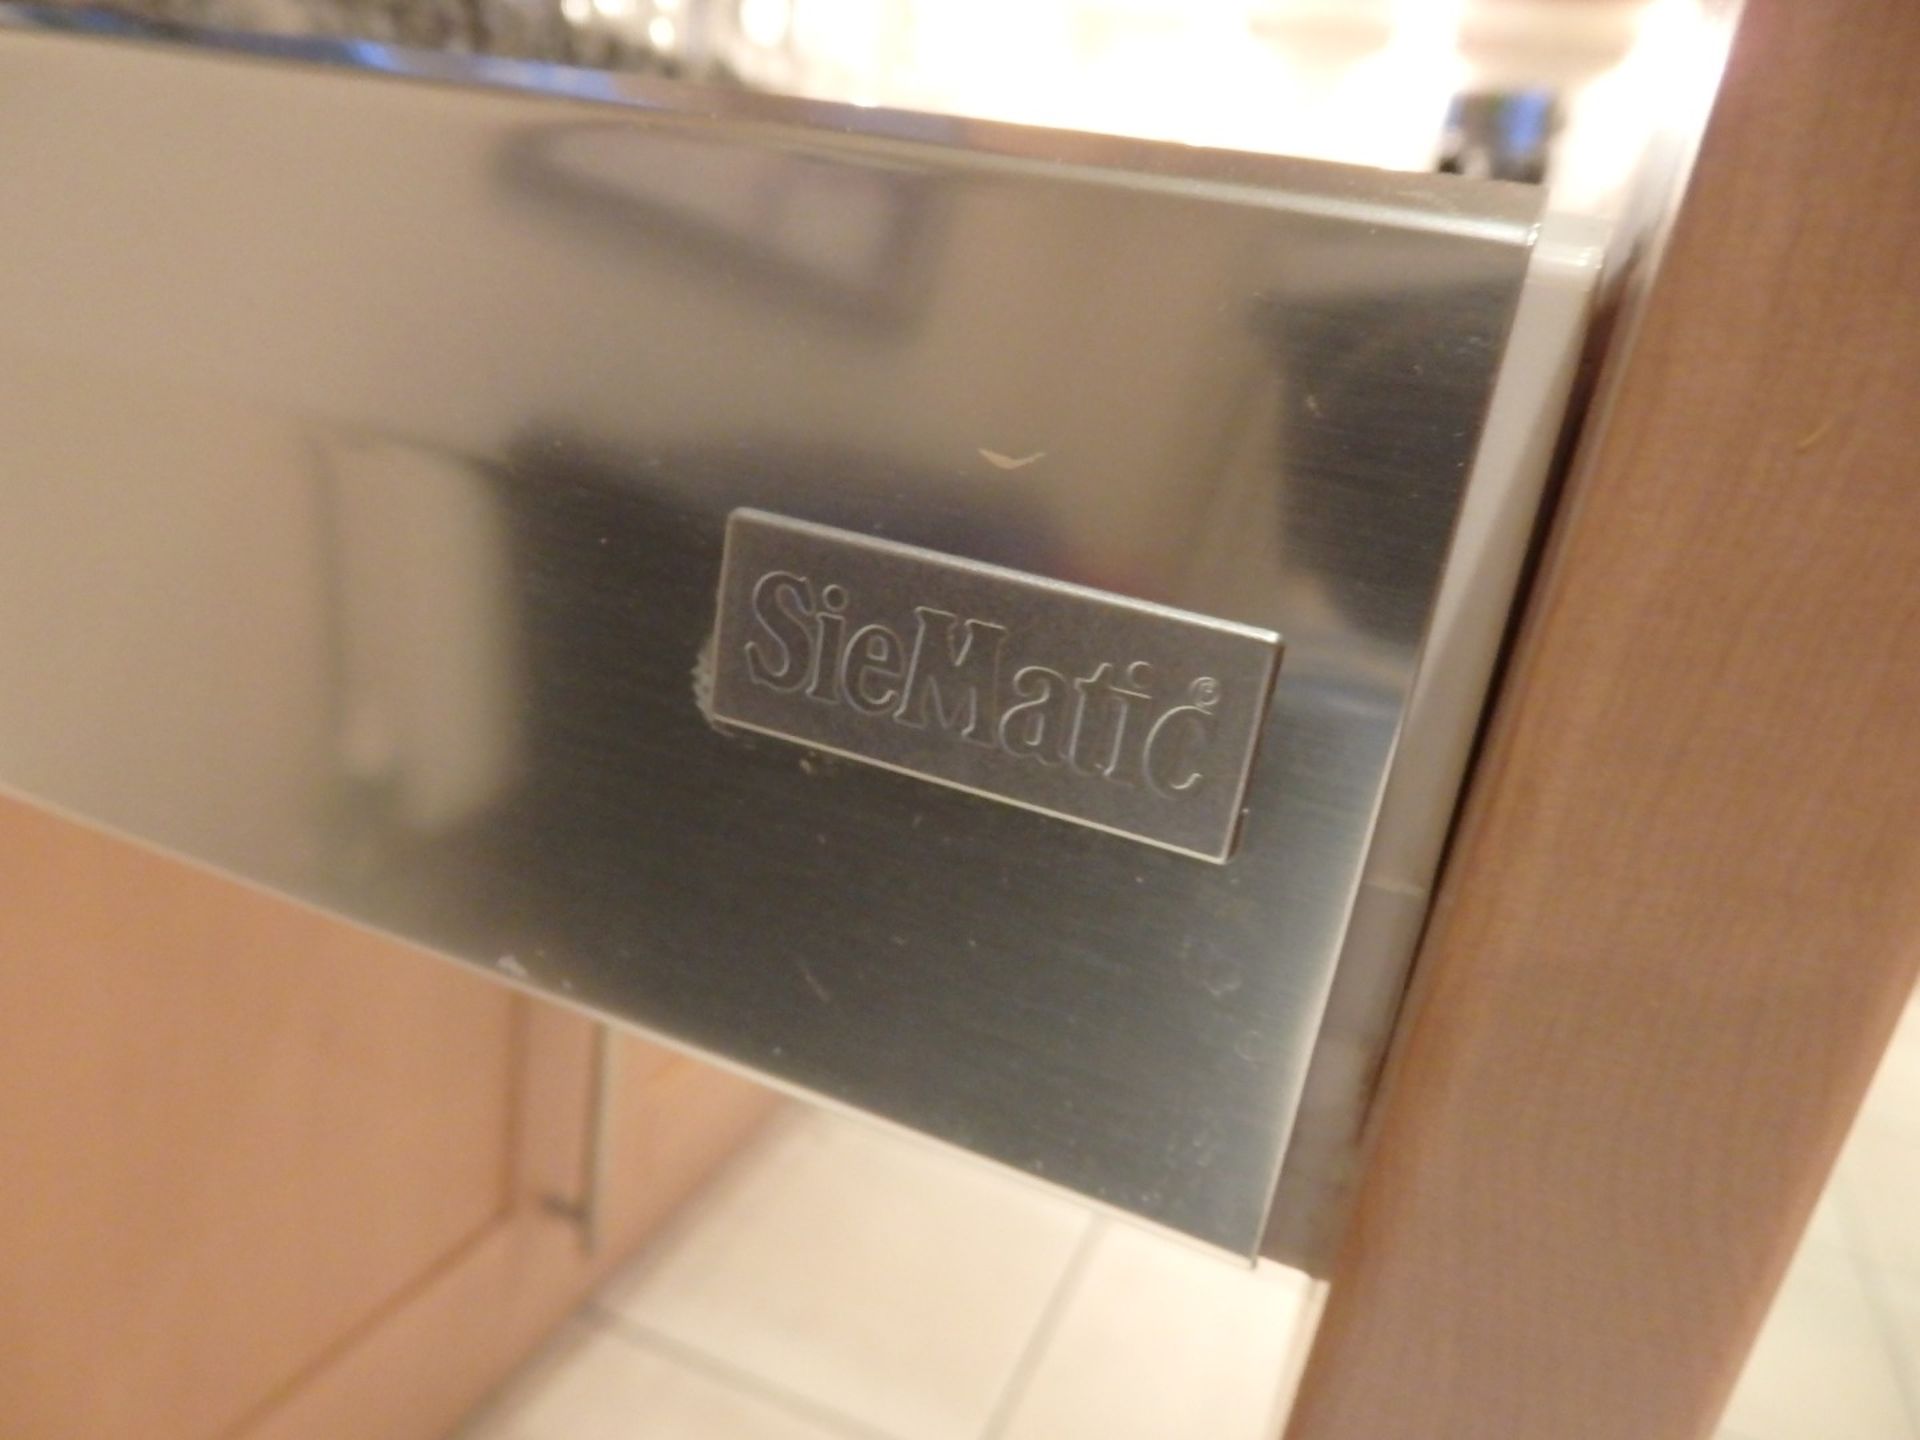 1 x Siematic Fitted Kitchen With Beech Shaker Style Doors, Granite Worktops, Central Island and - Image 19 of 151